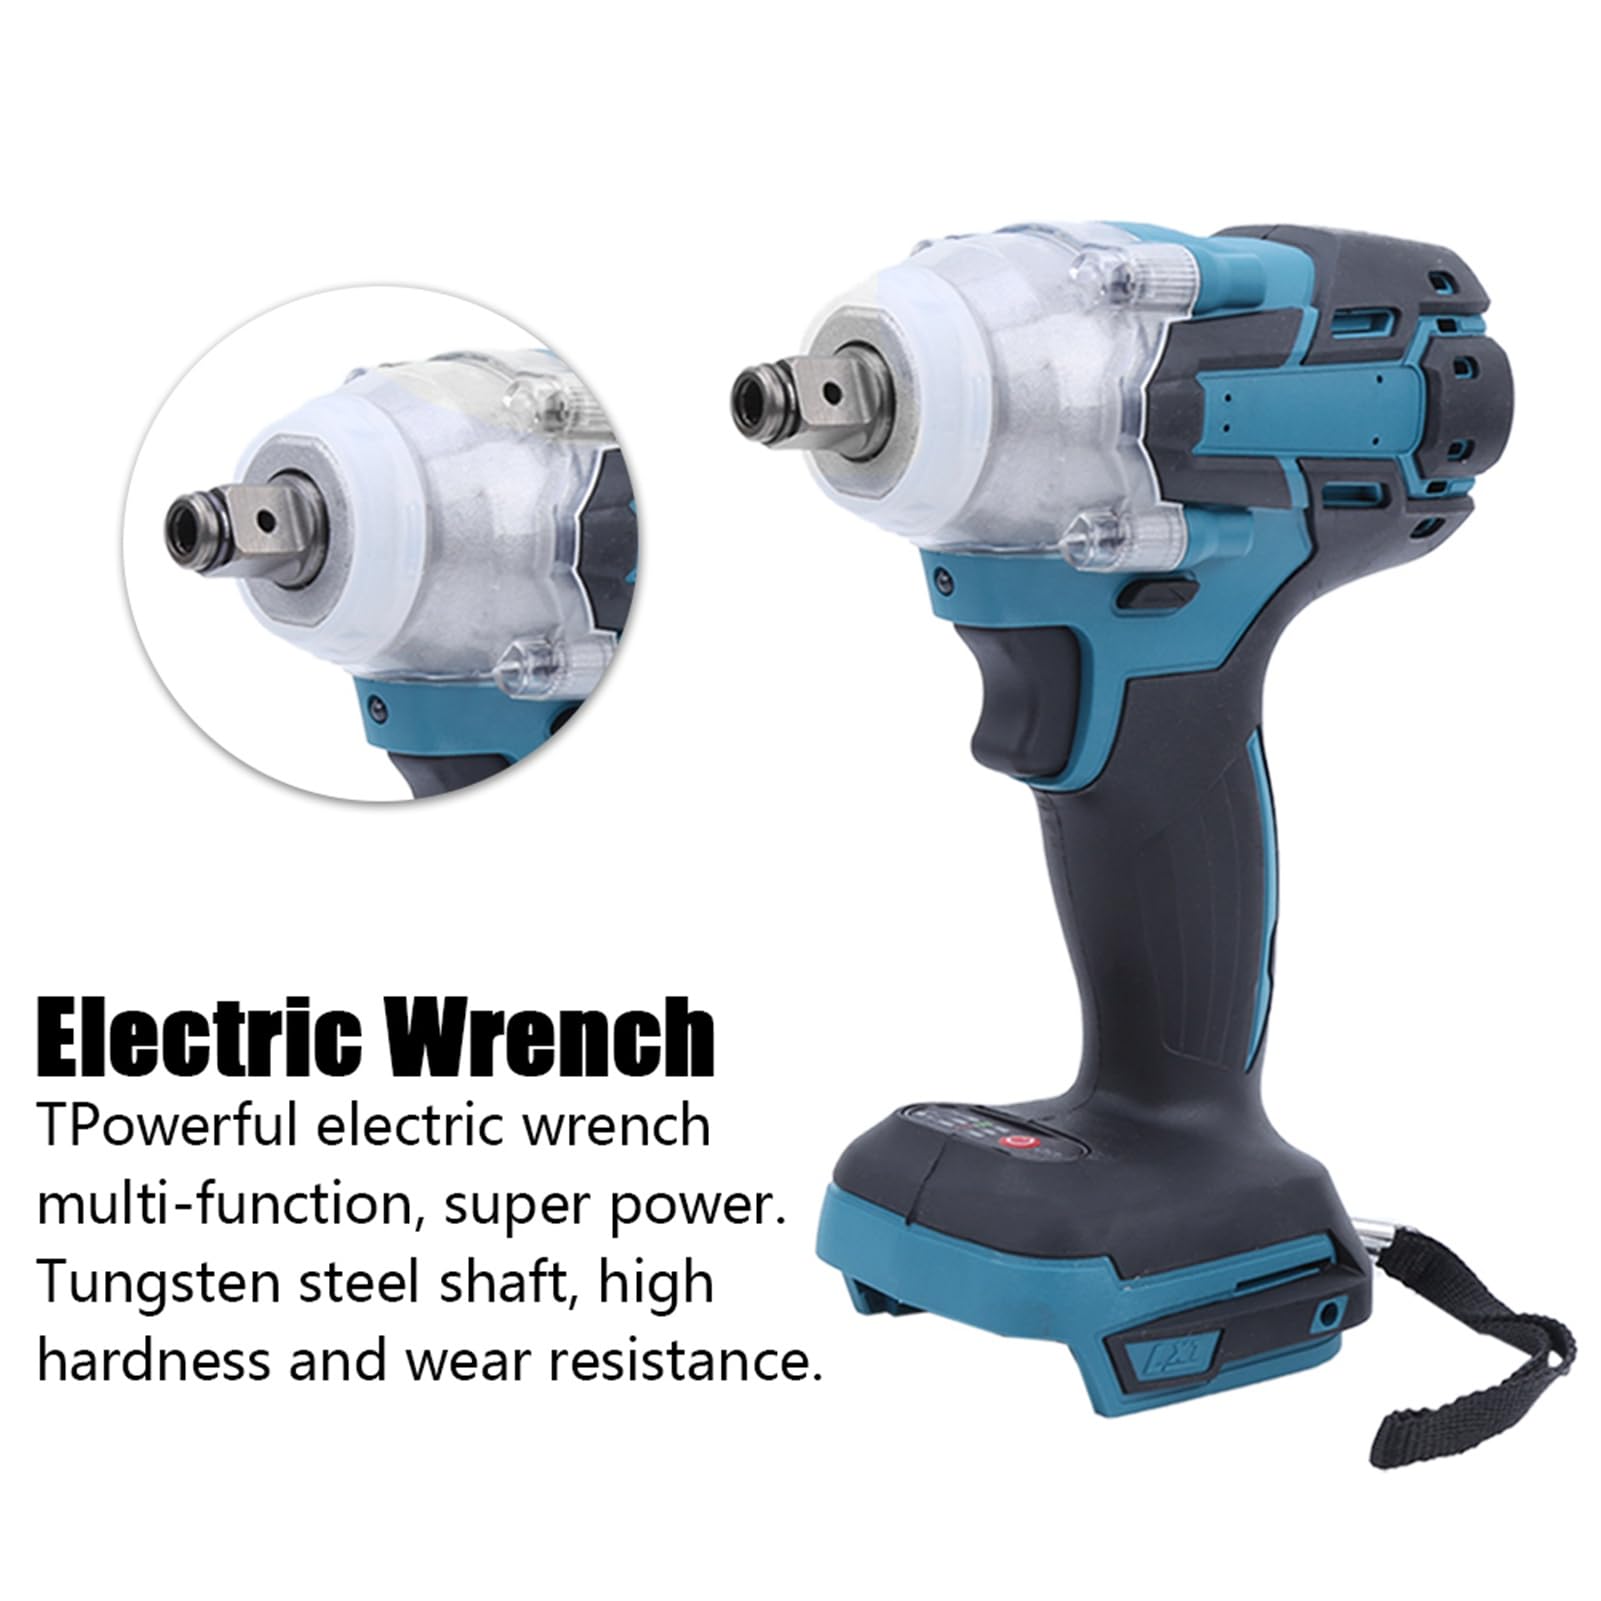 LiebeWH 21V Brushless Impact Wrench, Cordless Impact Wrench Tungsten Steel Shaft Electric Spanner Non‑Slip Handle Rechargeable for Construction Site Shelves Maintenance Woodworking